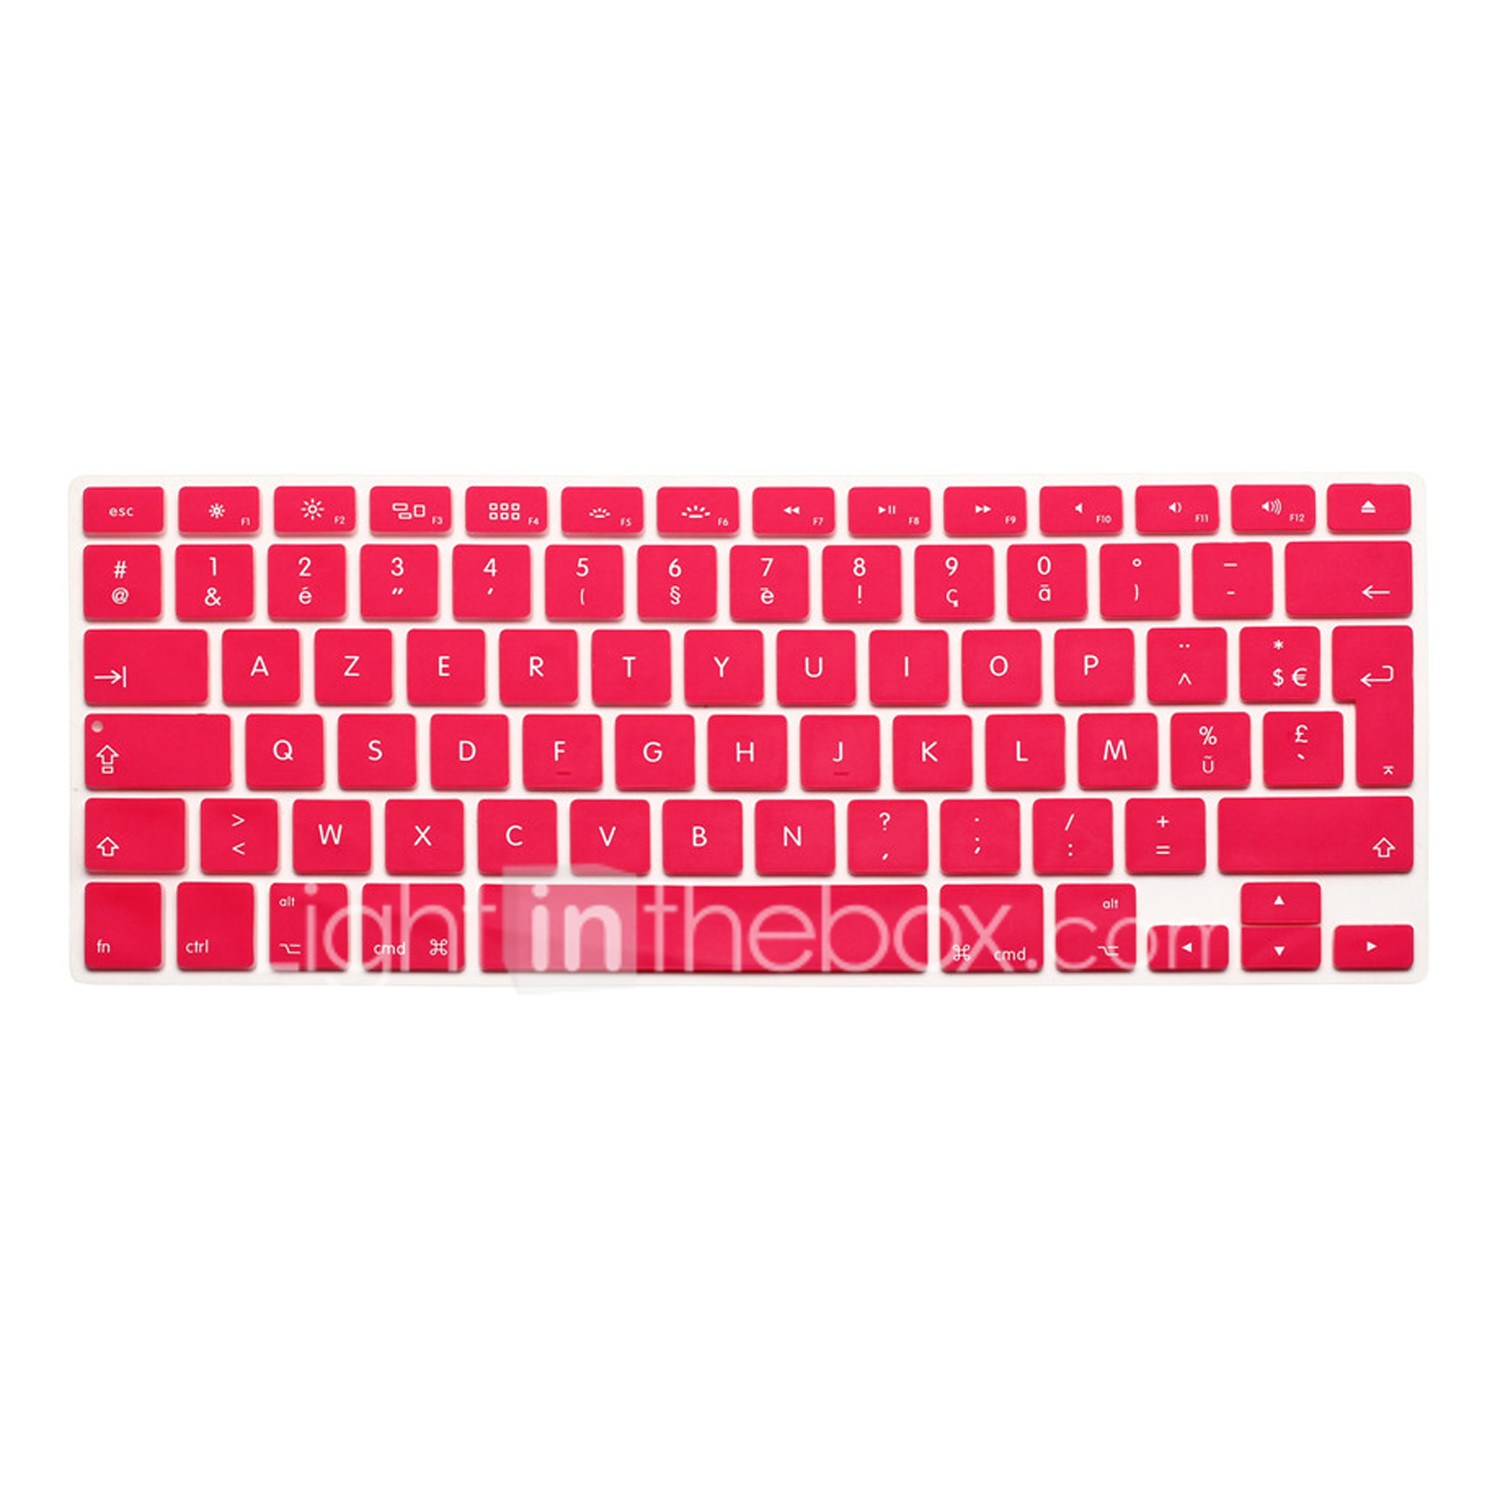 Spanish EU Silicone Keyboard Protector Cover Skin Protective Film for Mac Book 12 inch pro13 Colorful Keyboard Film Spain-K